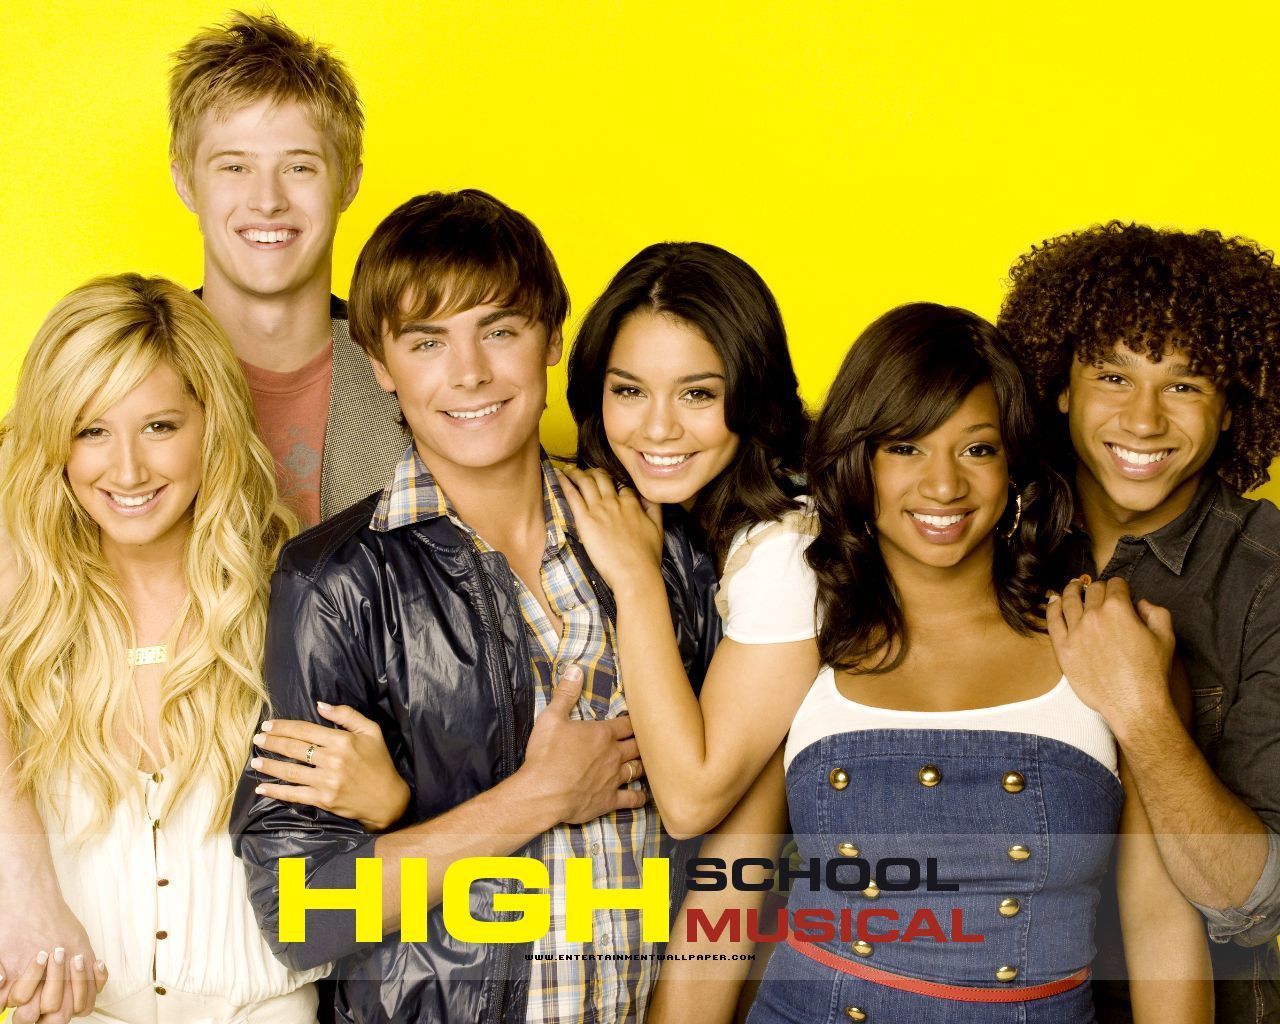 We're All In This Together минусбэк | HSM